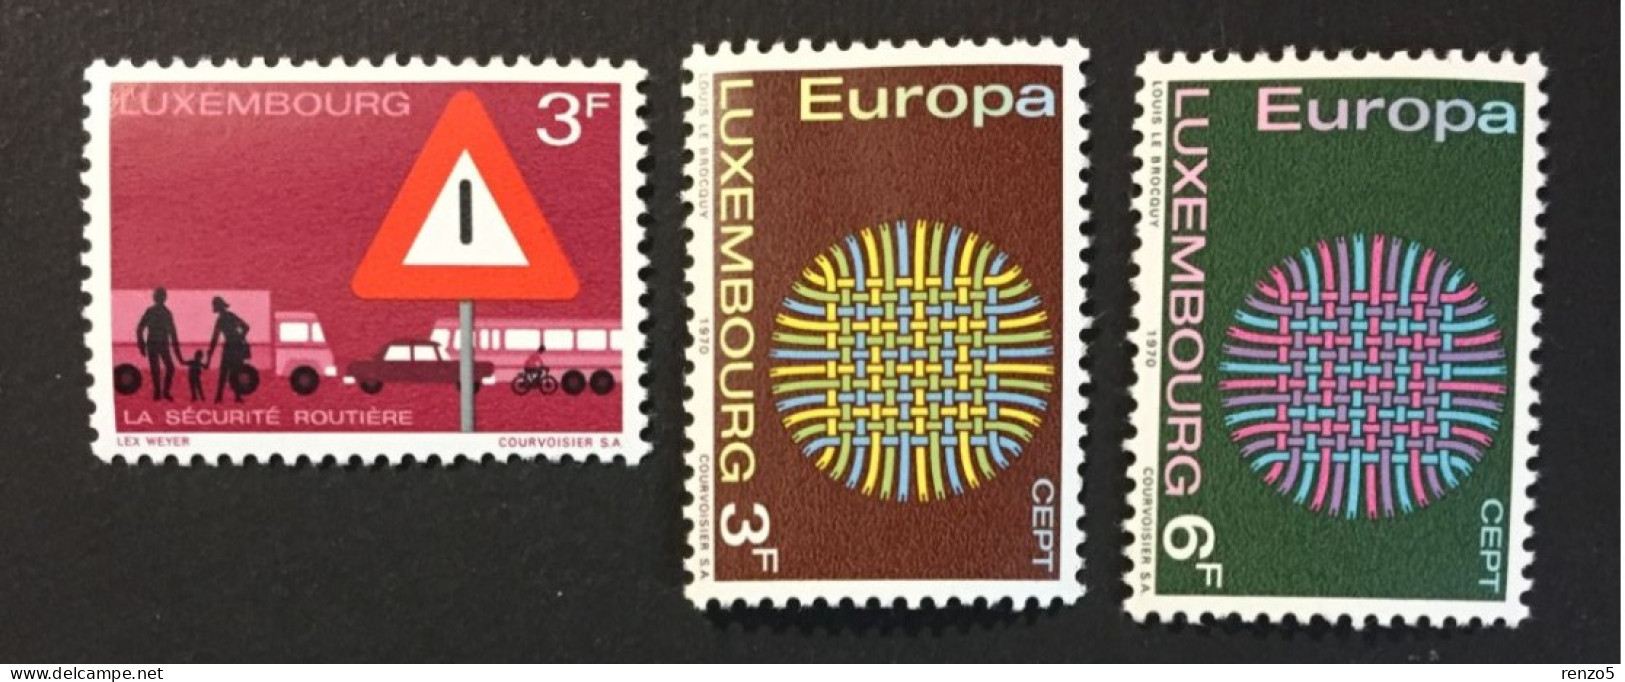 1970 Luxembourg -The Importance Of Traffic Safety, Europa CEPT - Unused - Nuovi